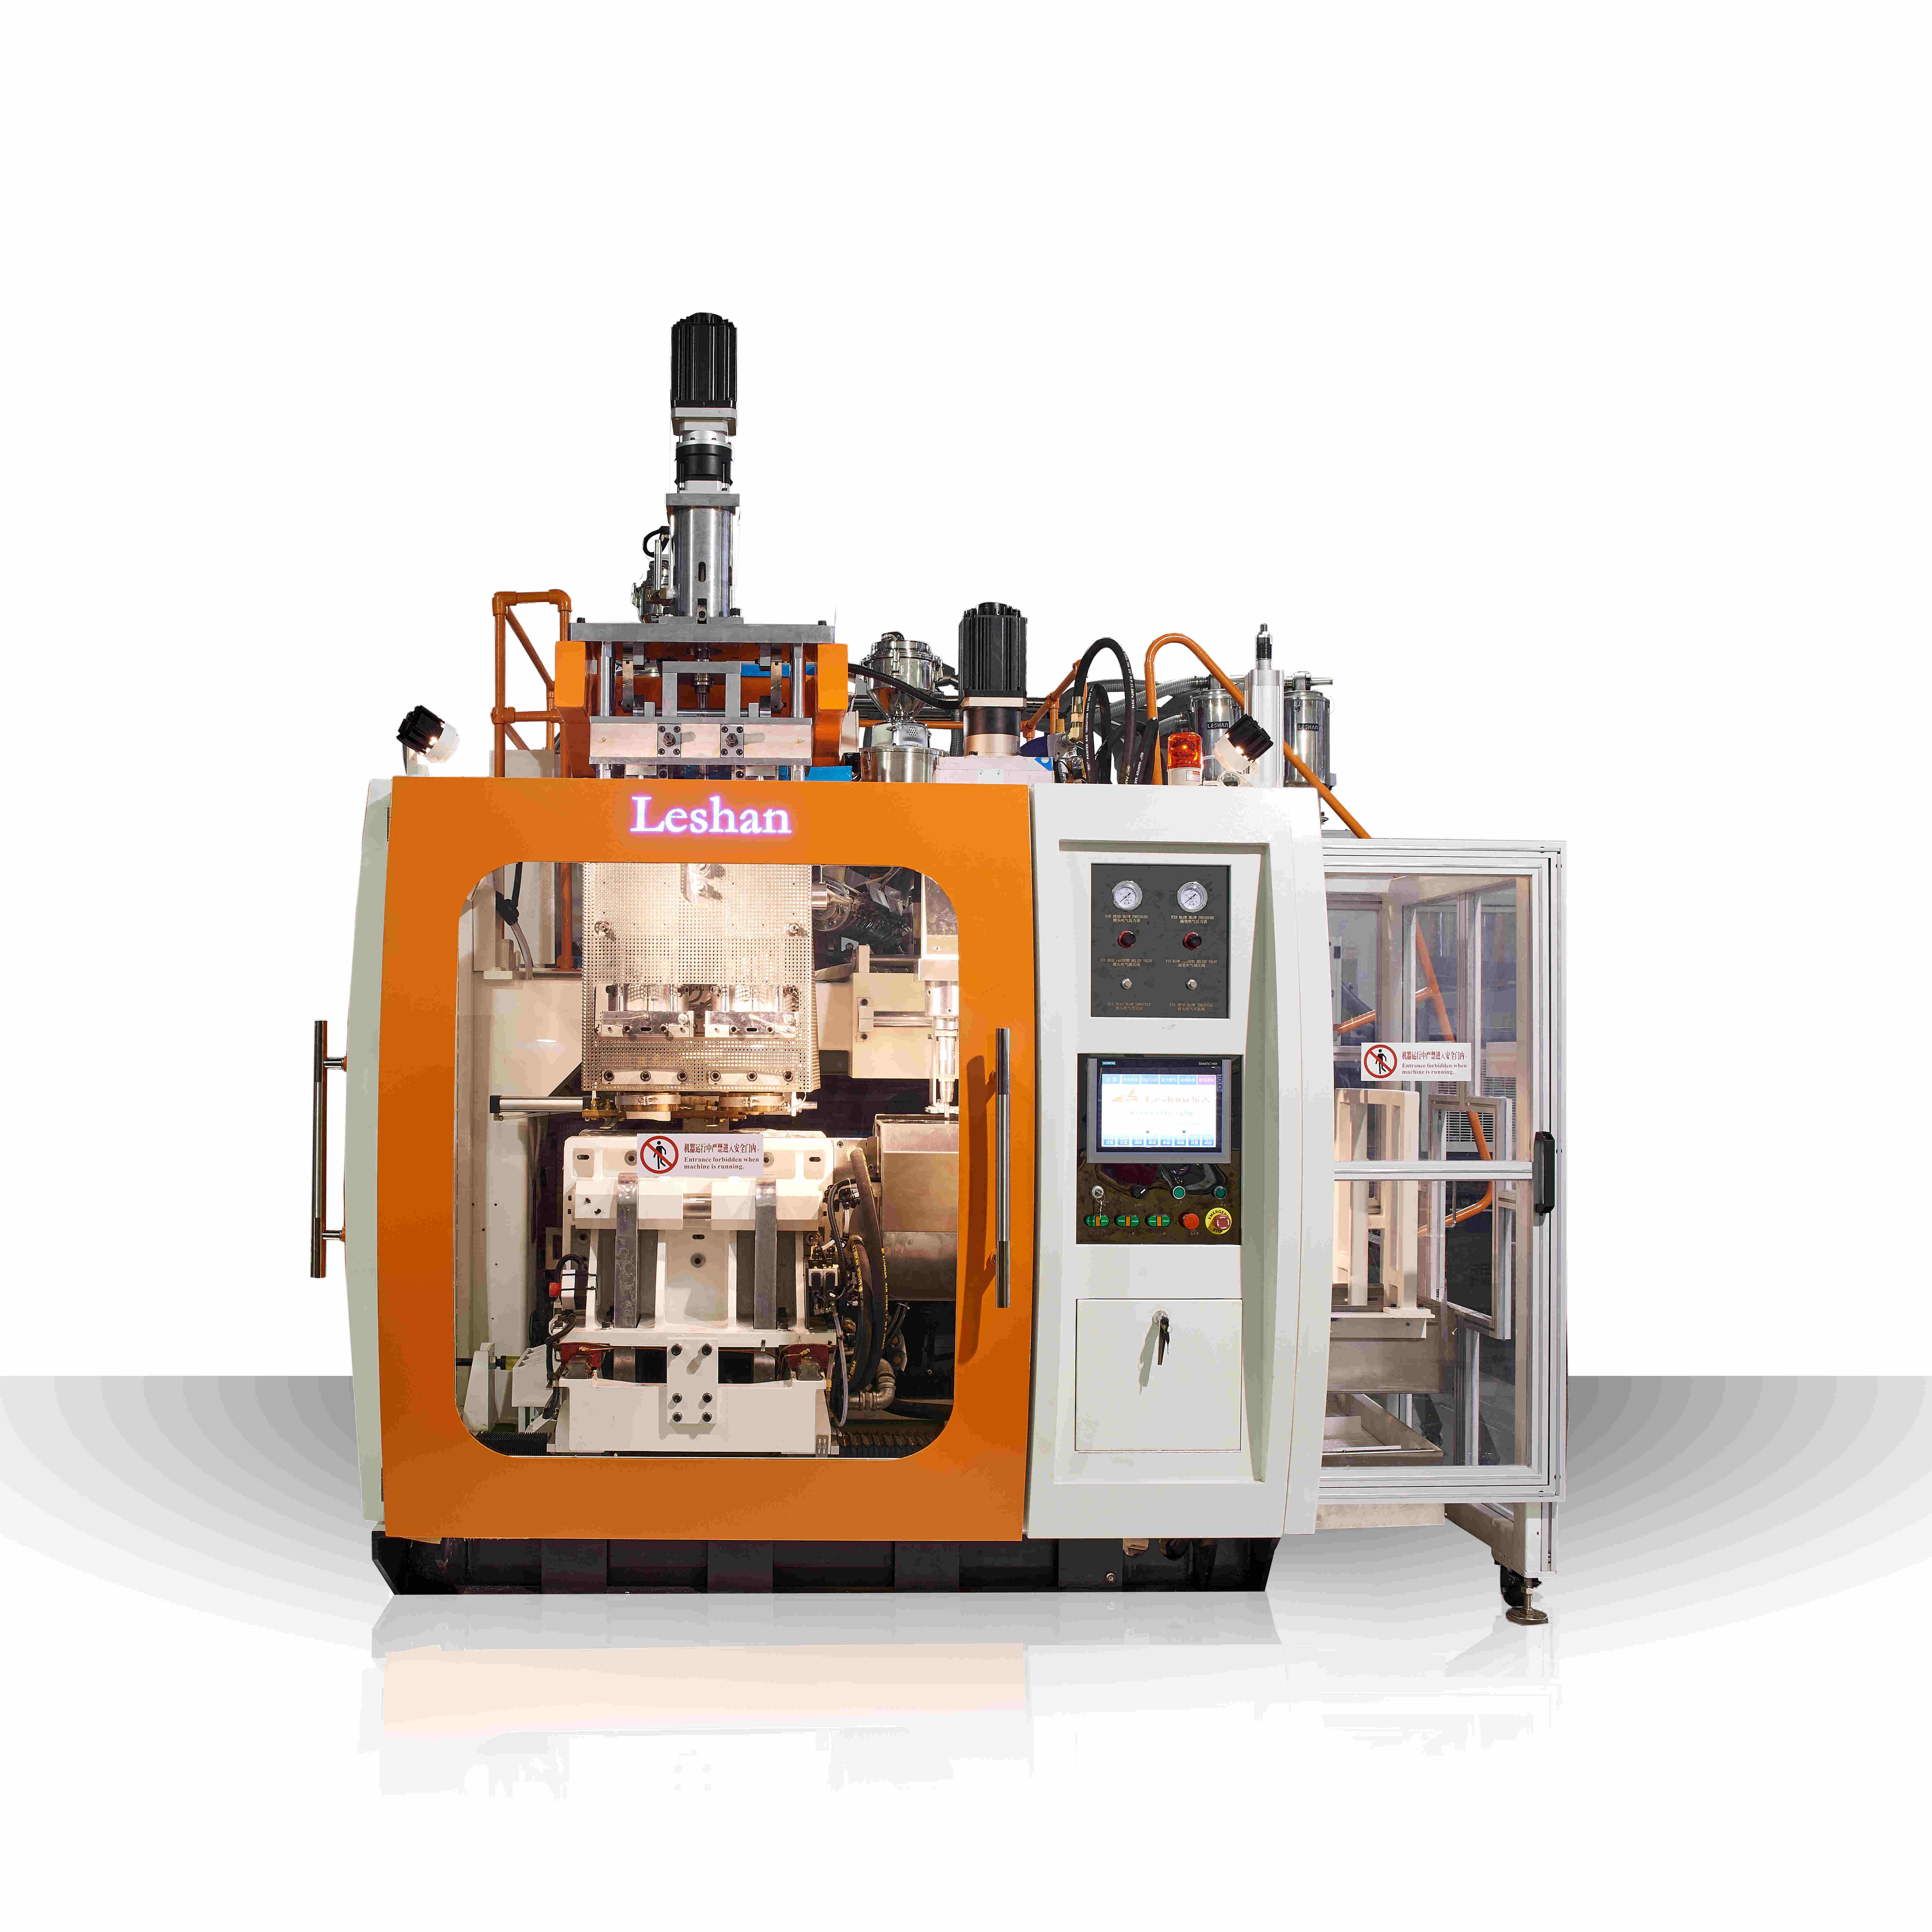 Which industries can apply 3 layer blow molding machine?